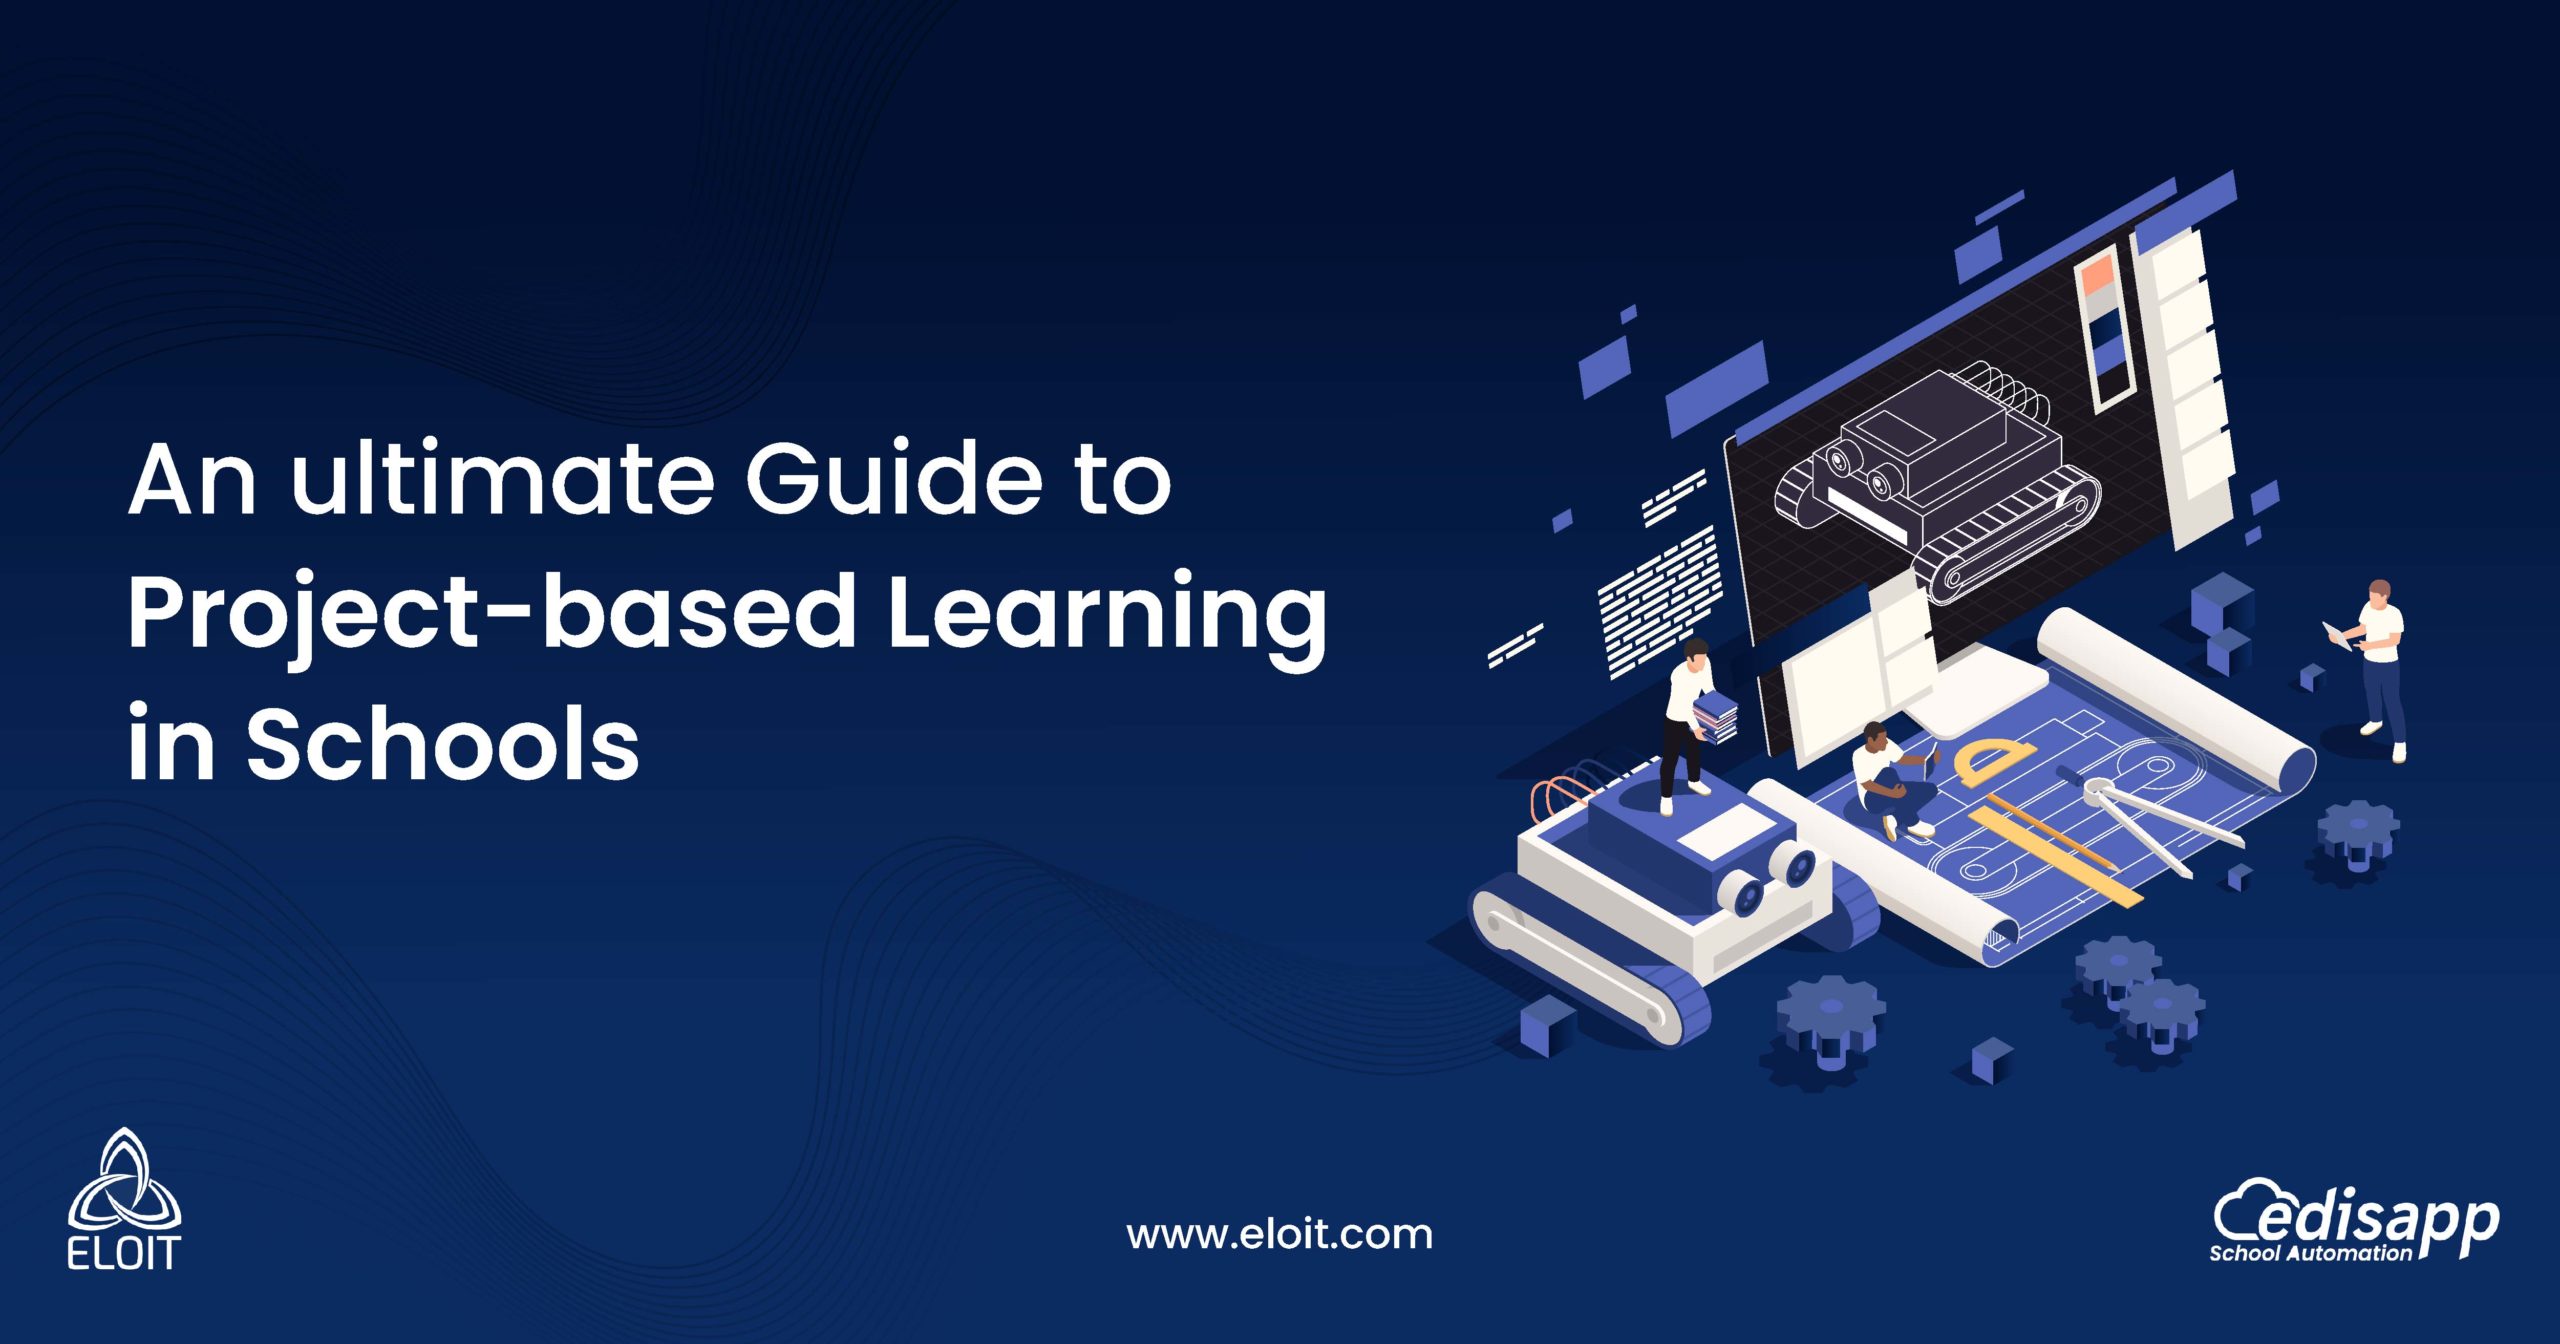 An Ultimate Guide to Project-based Learning in Schools